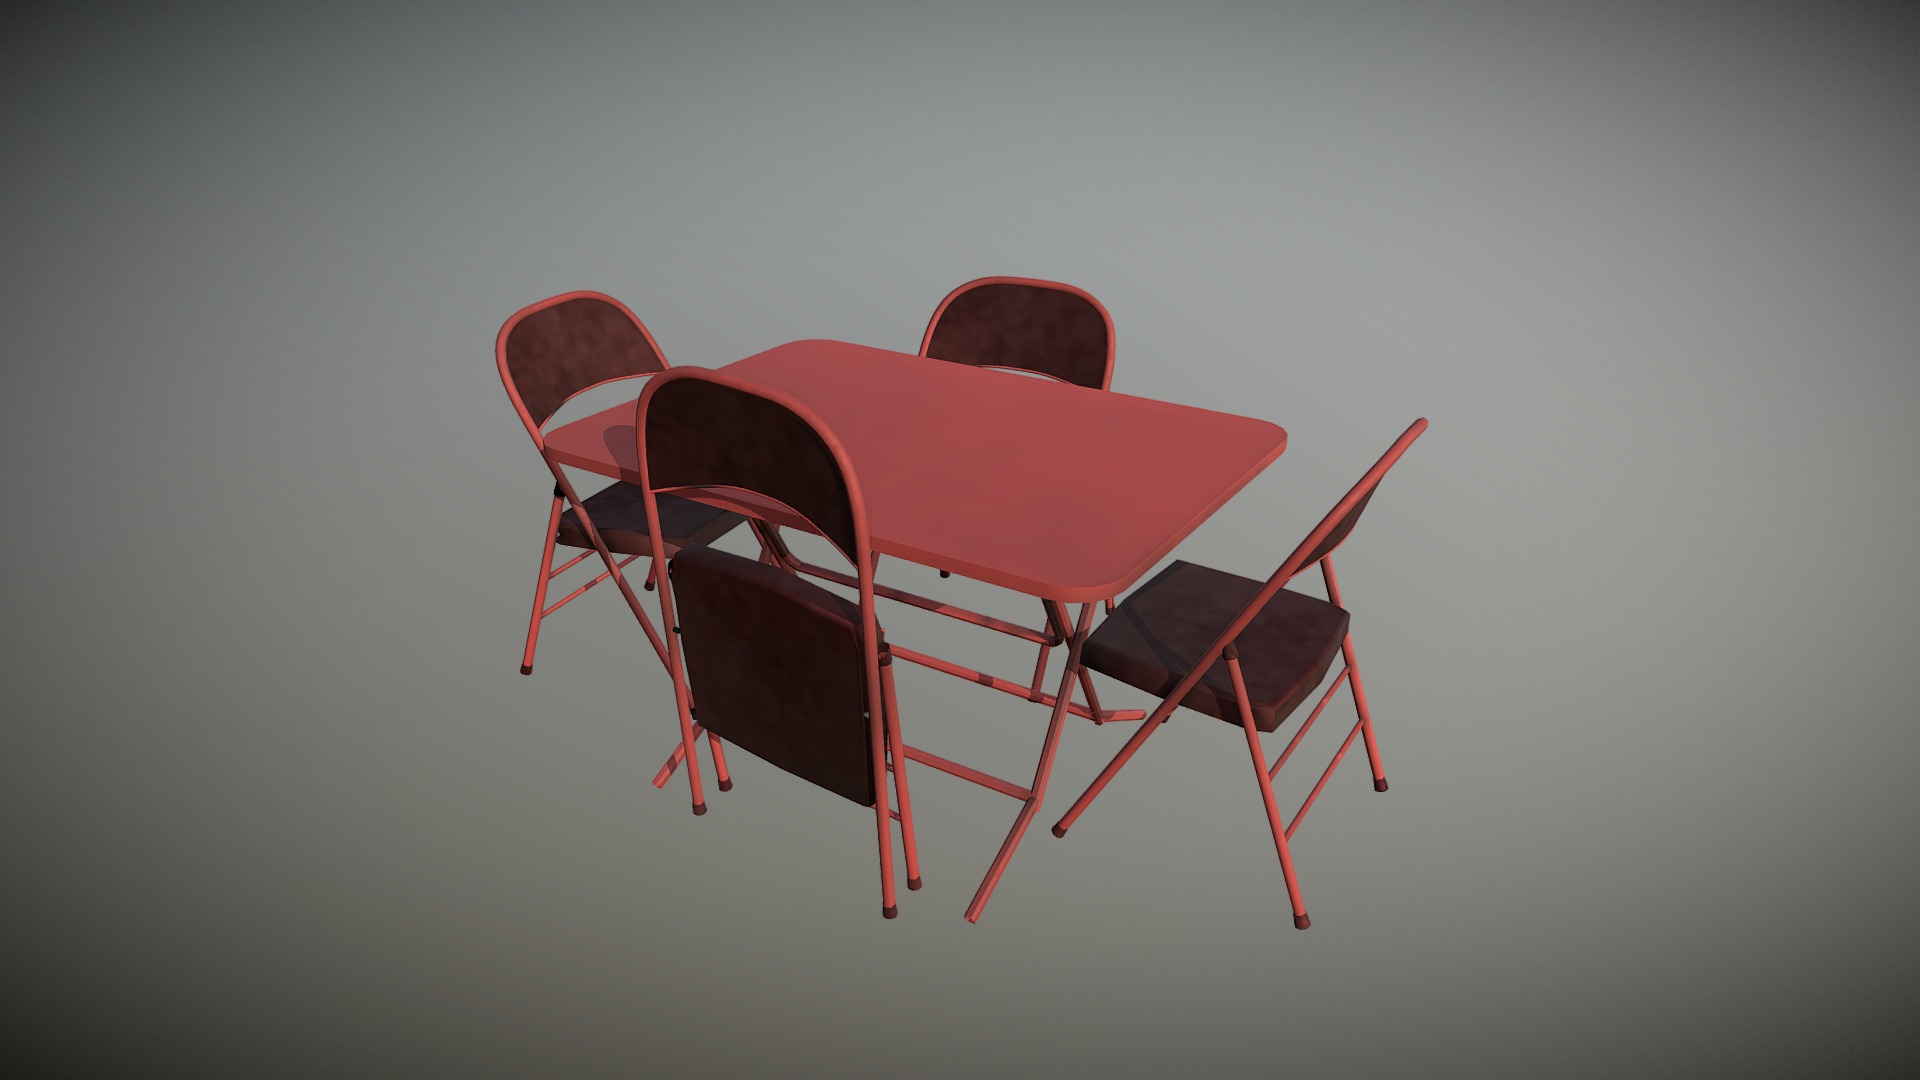 3D model Folding table chair - This is a 3D model of the Folding table chair. The 3D model is about a couple of red chairs.